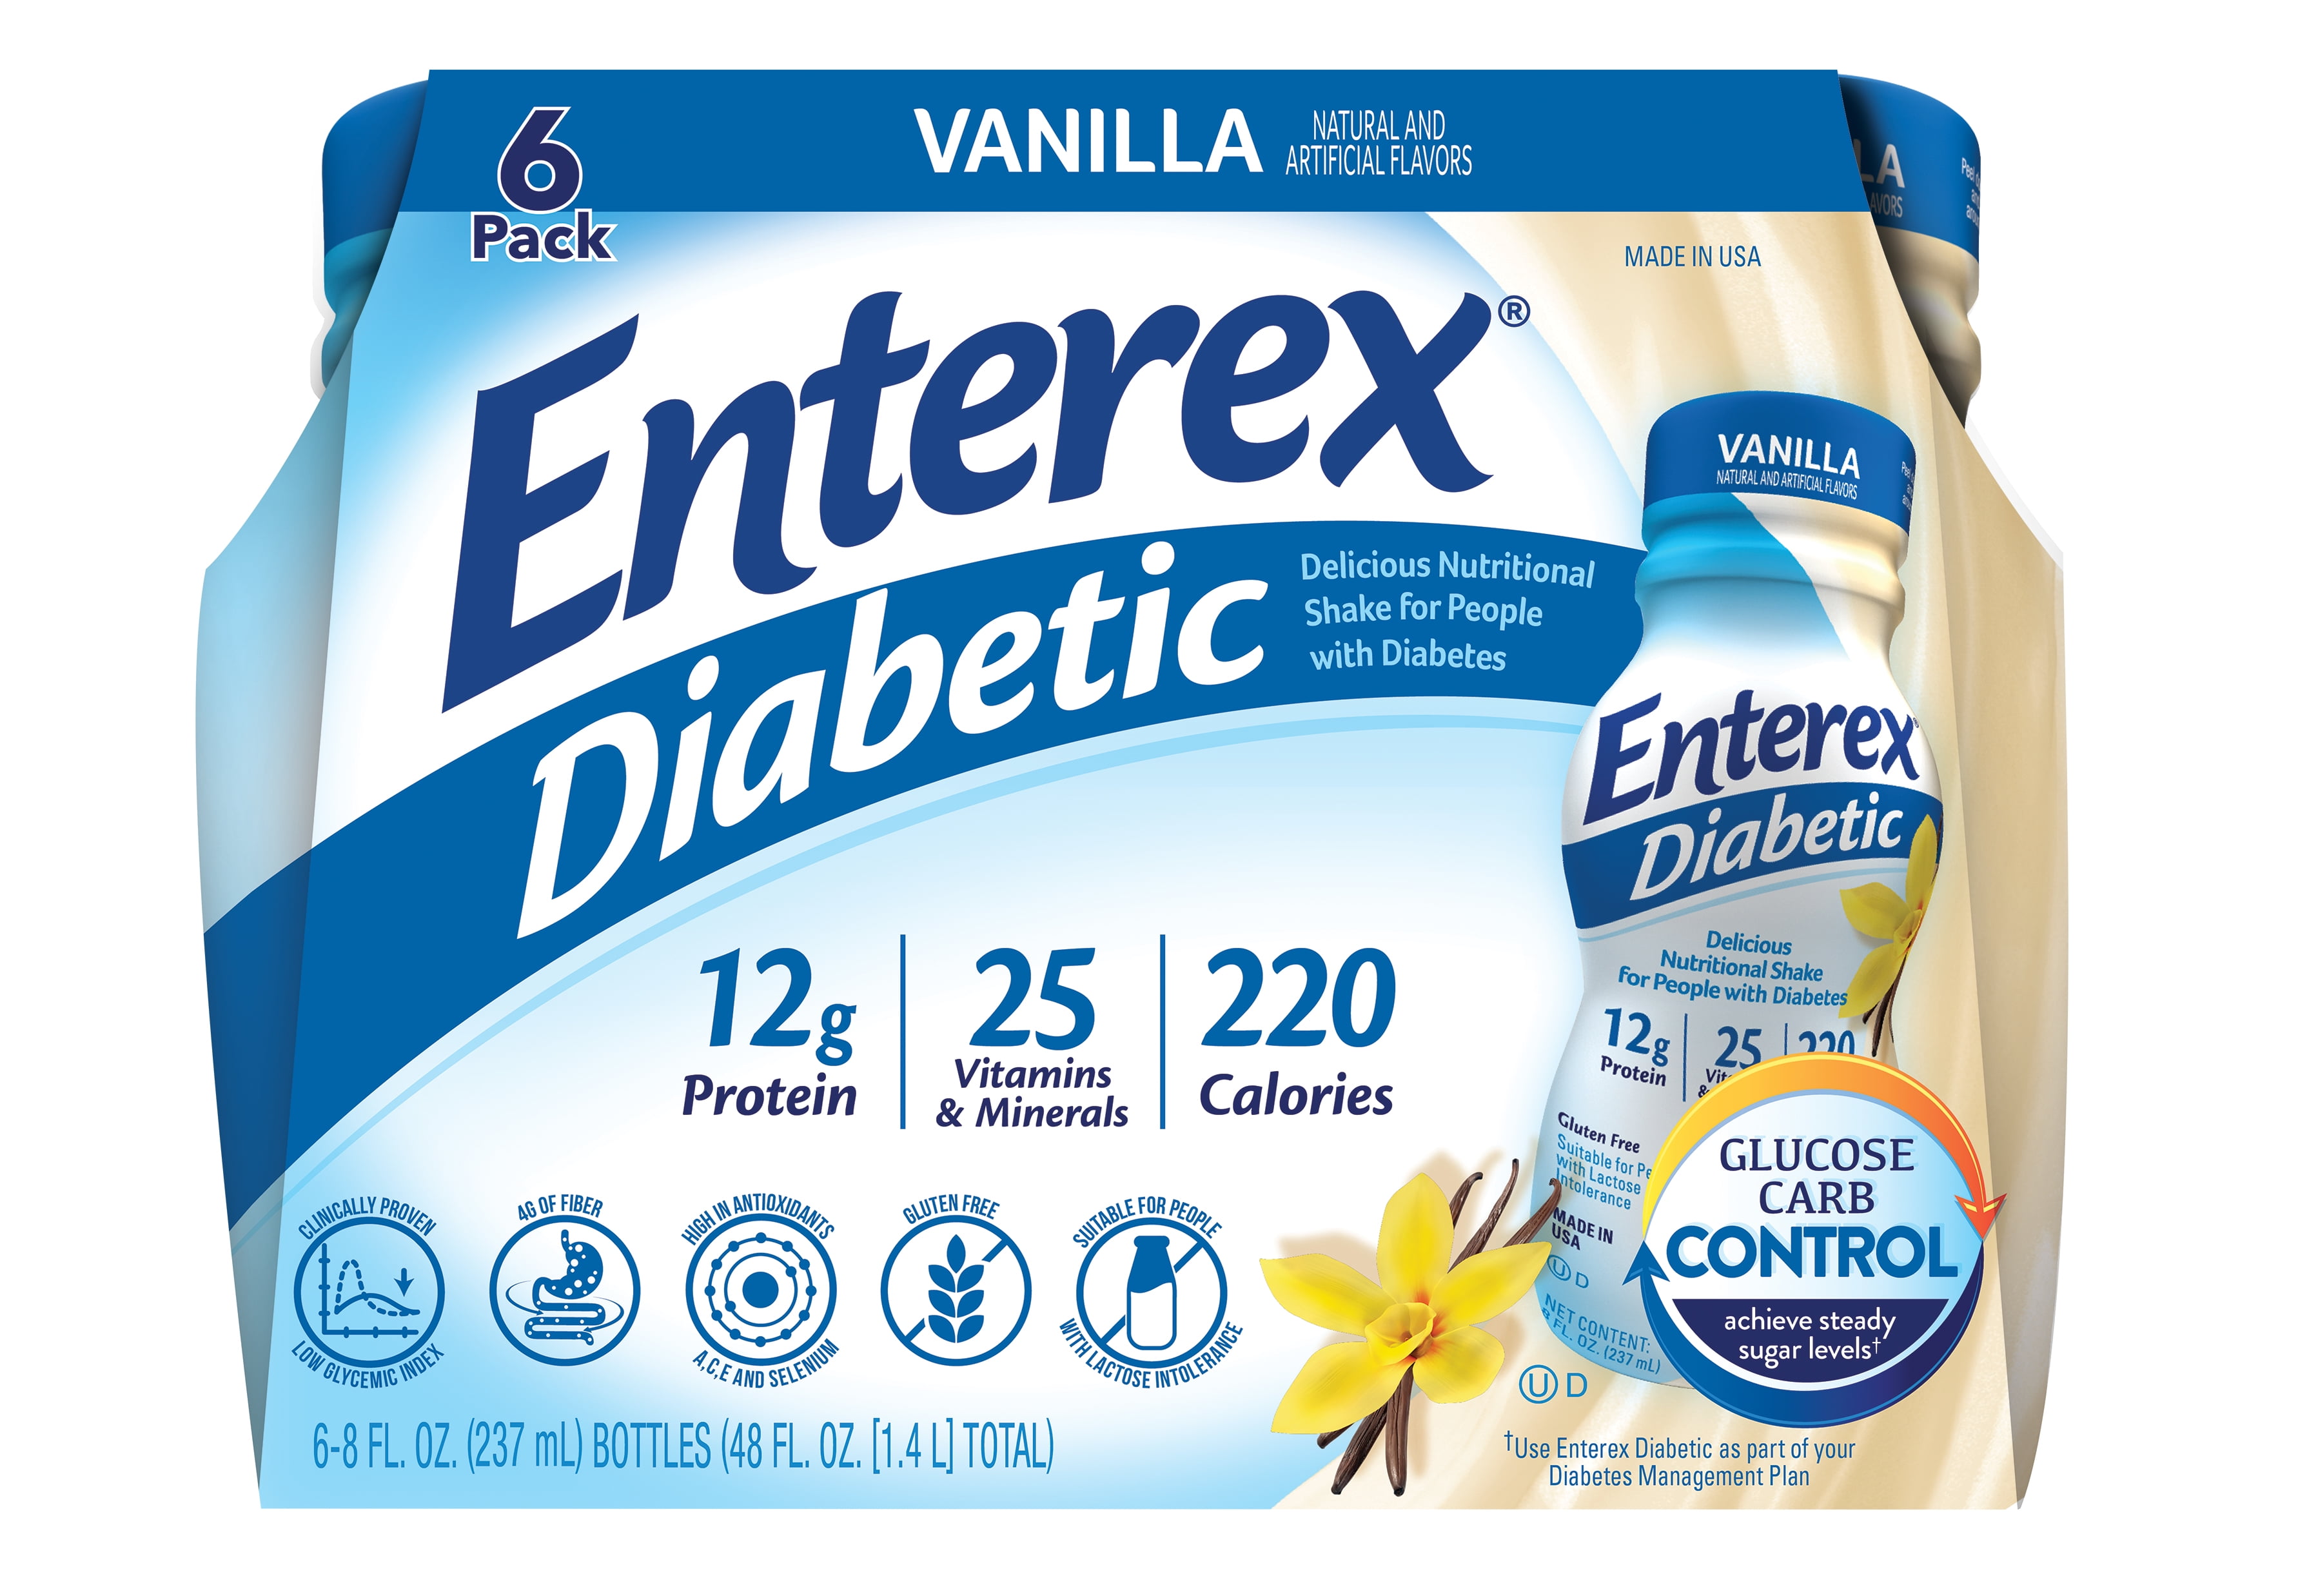 Enterex Diabetic Vanilla Flavor, Nutritional Meal Replacement Shake for People with Diabetes, Can Help Manage Blood Sugar, 8 fl oz, 6 Pack